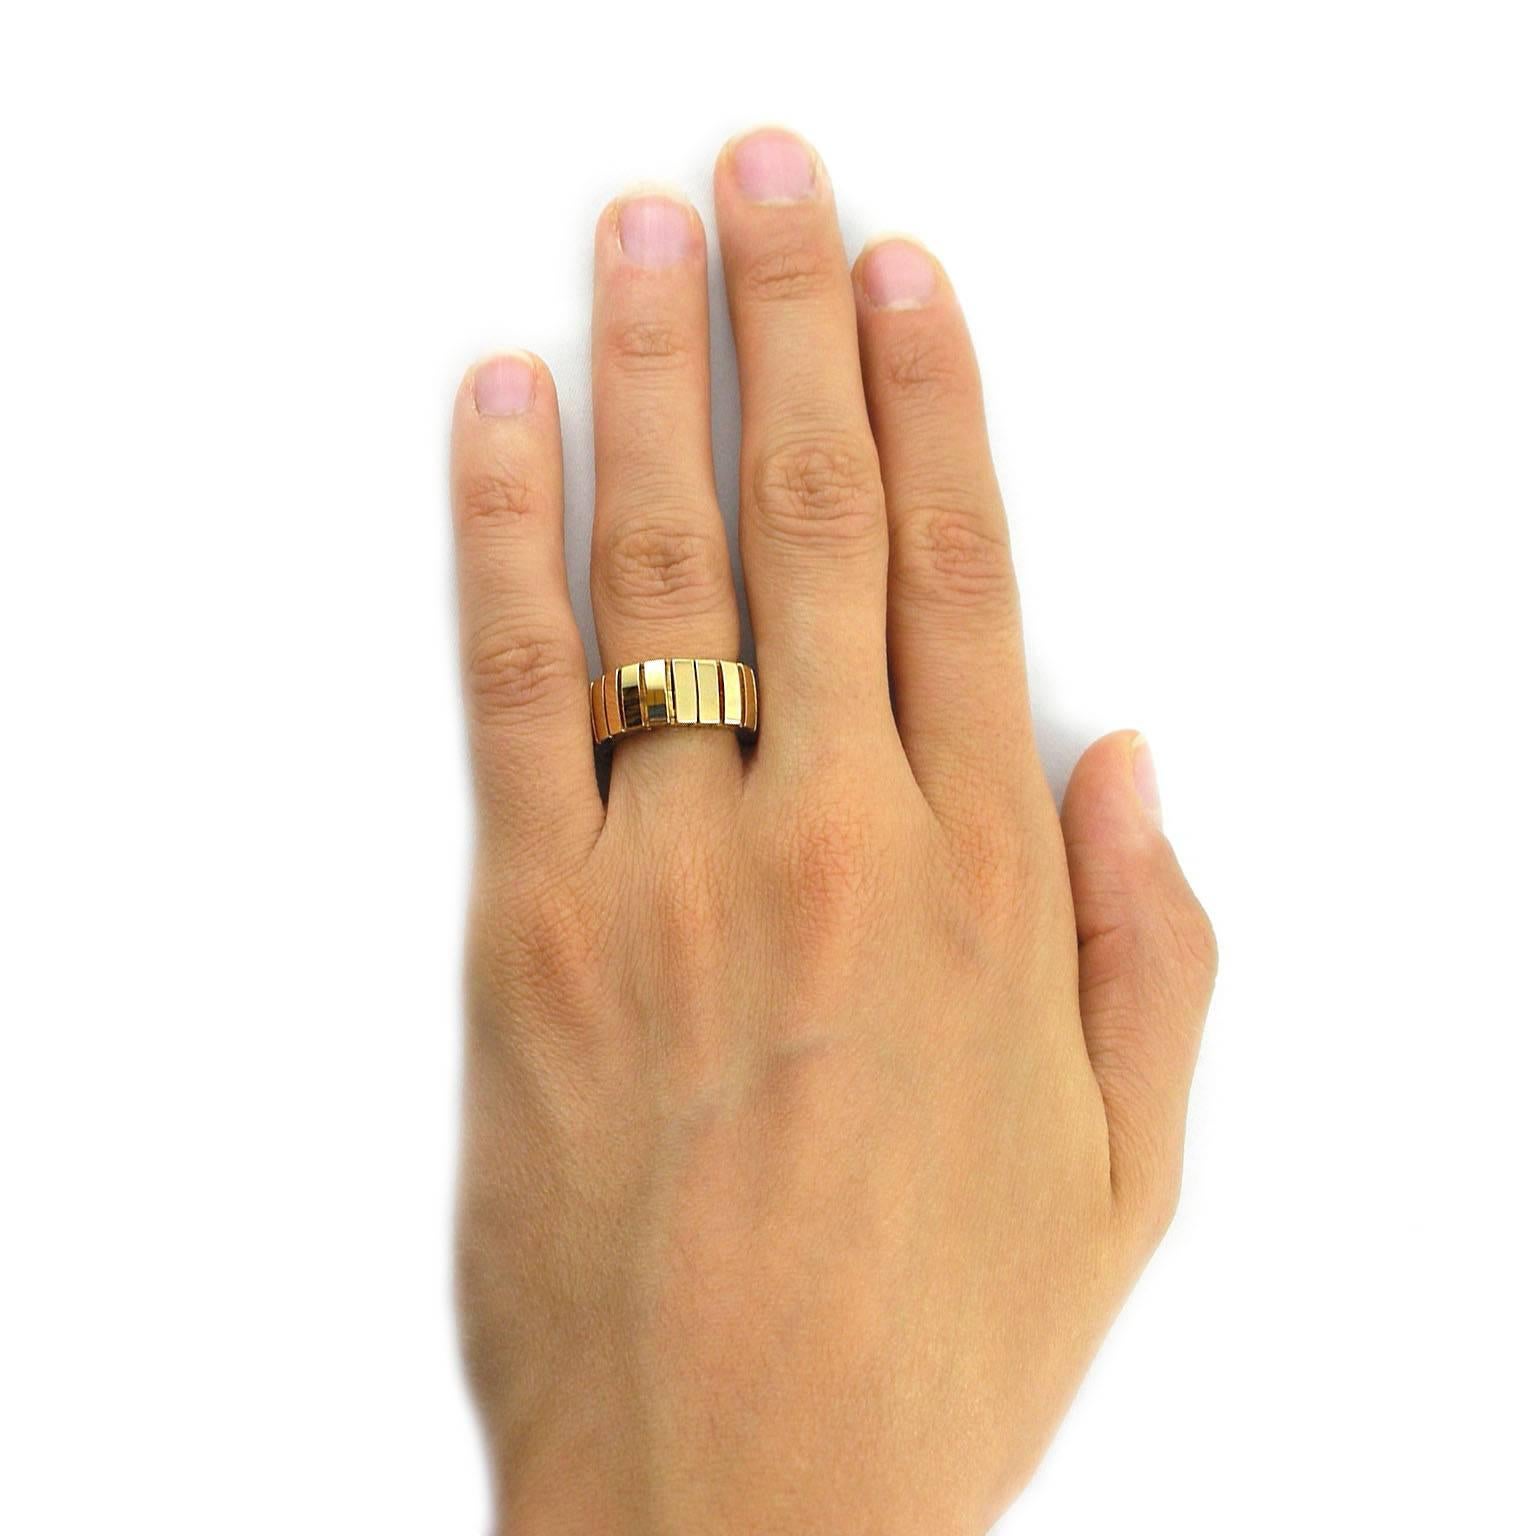 Jona design collection, hand crafted in Italy, 18 Karat yellow gold flexible band ring. US size 7 can be sized to any specification.
Dimensions : H 0.82 in x W 0.82 in x D 0.11 in - H 21 mm x W 21 mm X D 3 mm.
All Jona jewelry is new and has never